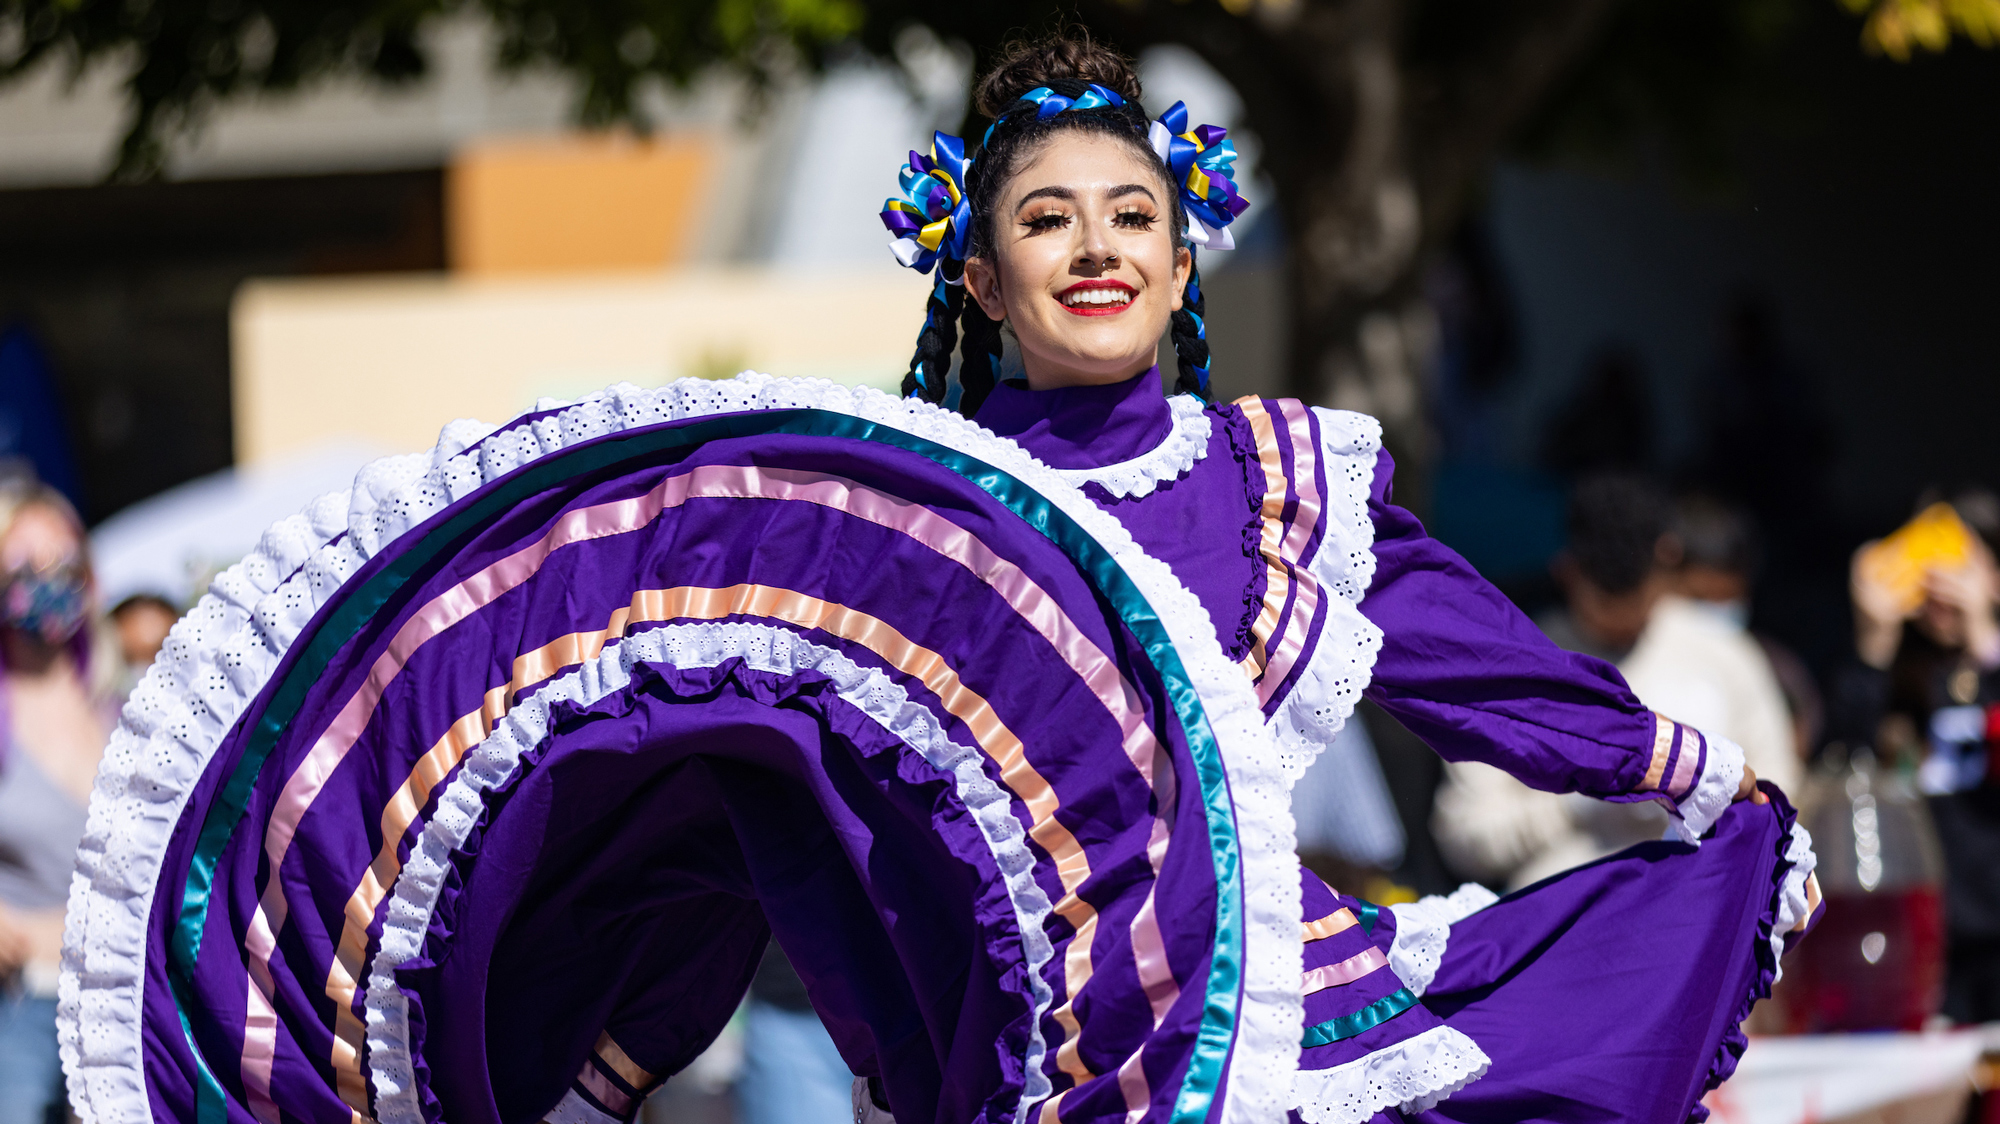 A woman in a bright purple dress smiles while dancing a traditional Mexican dance